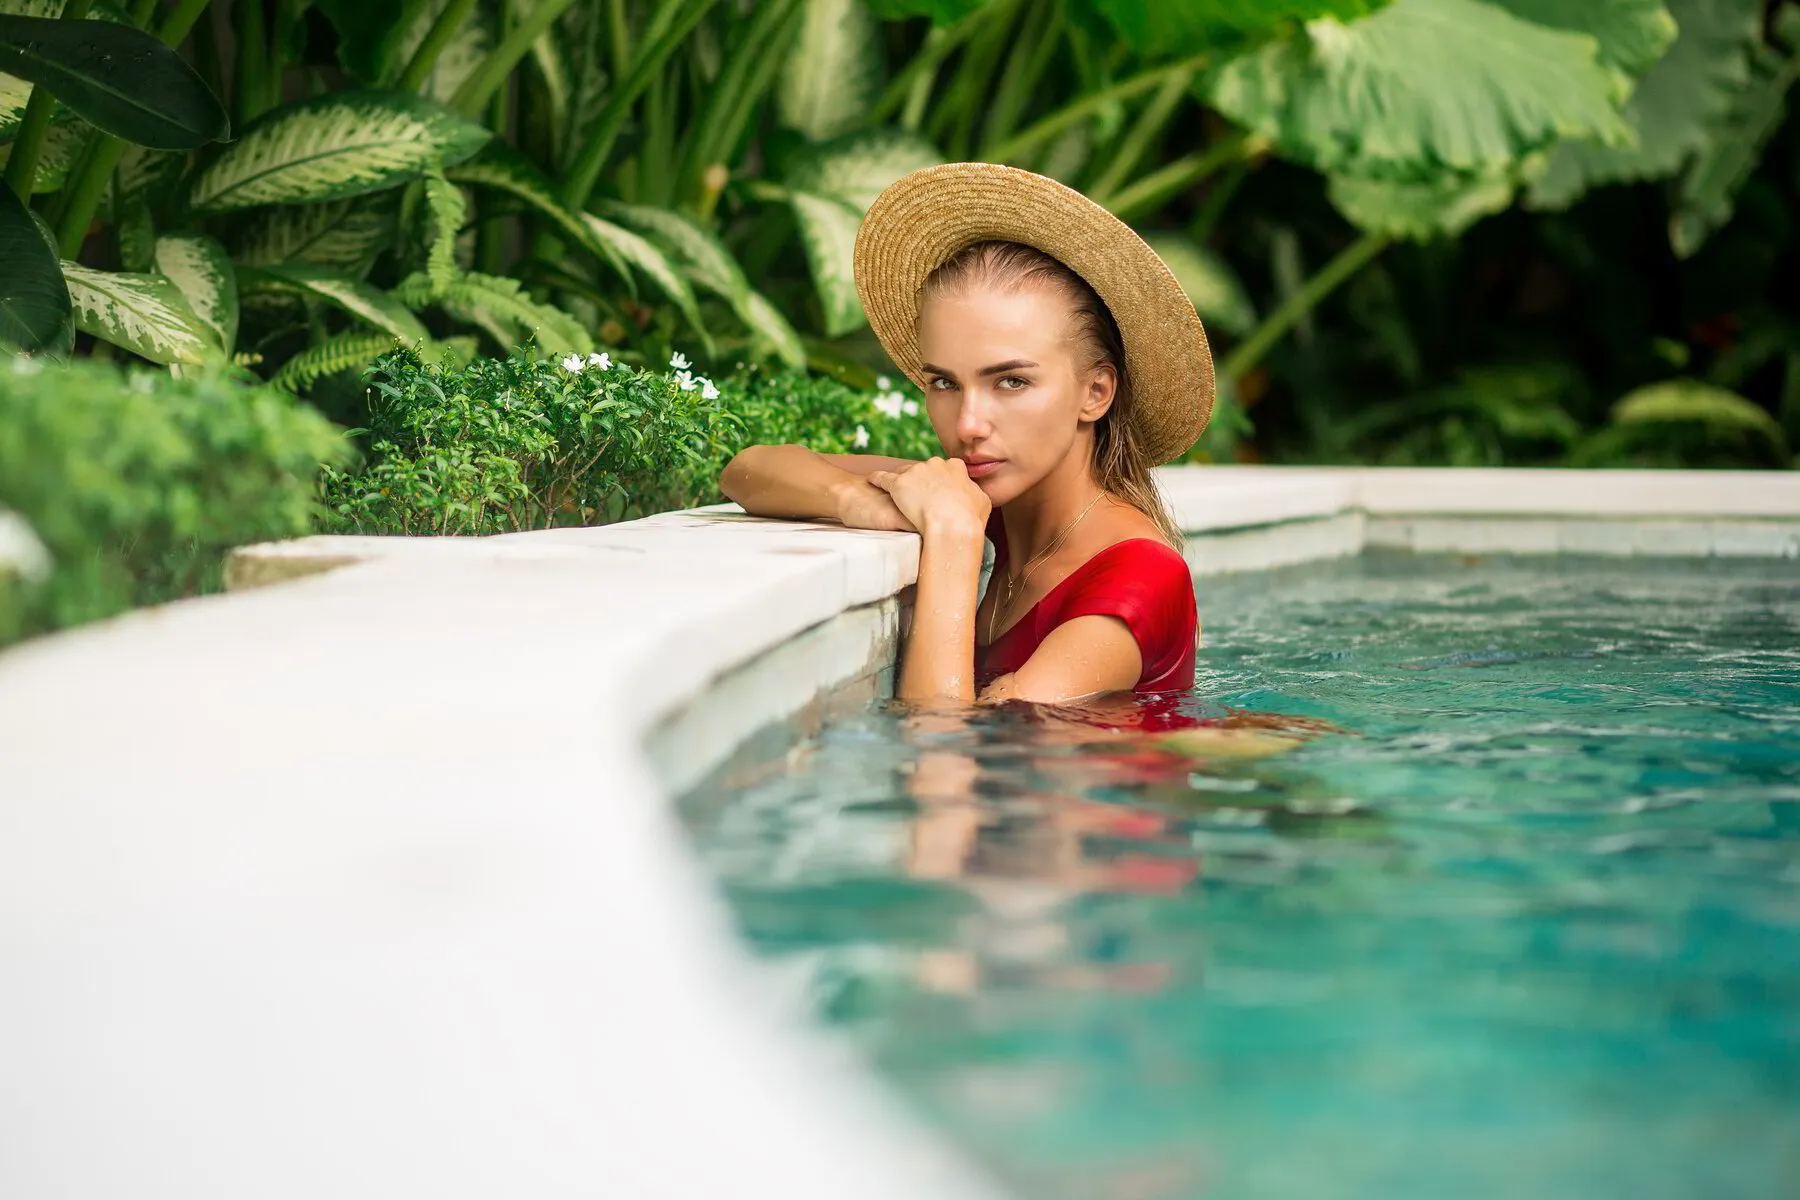 Living Pools & Spas. Blonde woman swimming in luxury pool leaning against pool wall near bushes and flowers